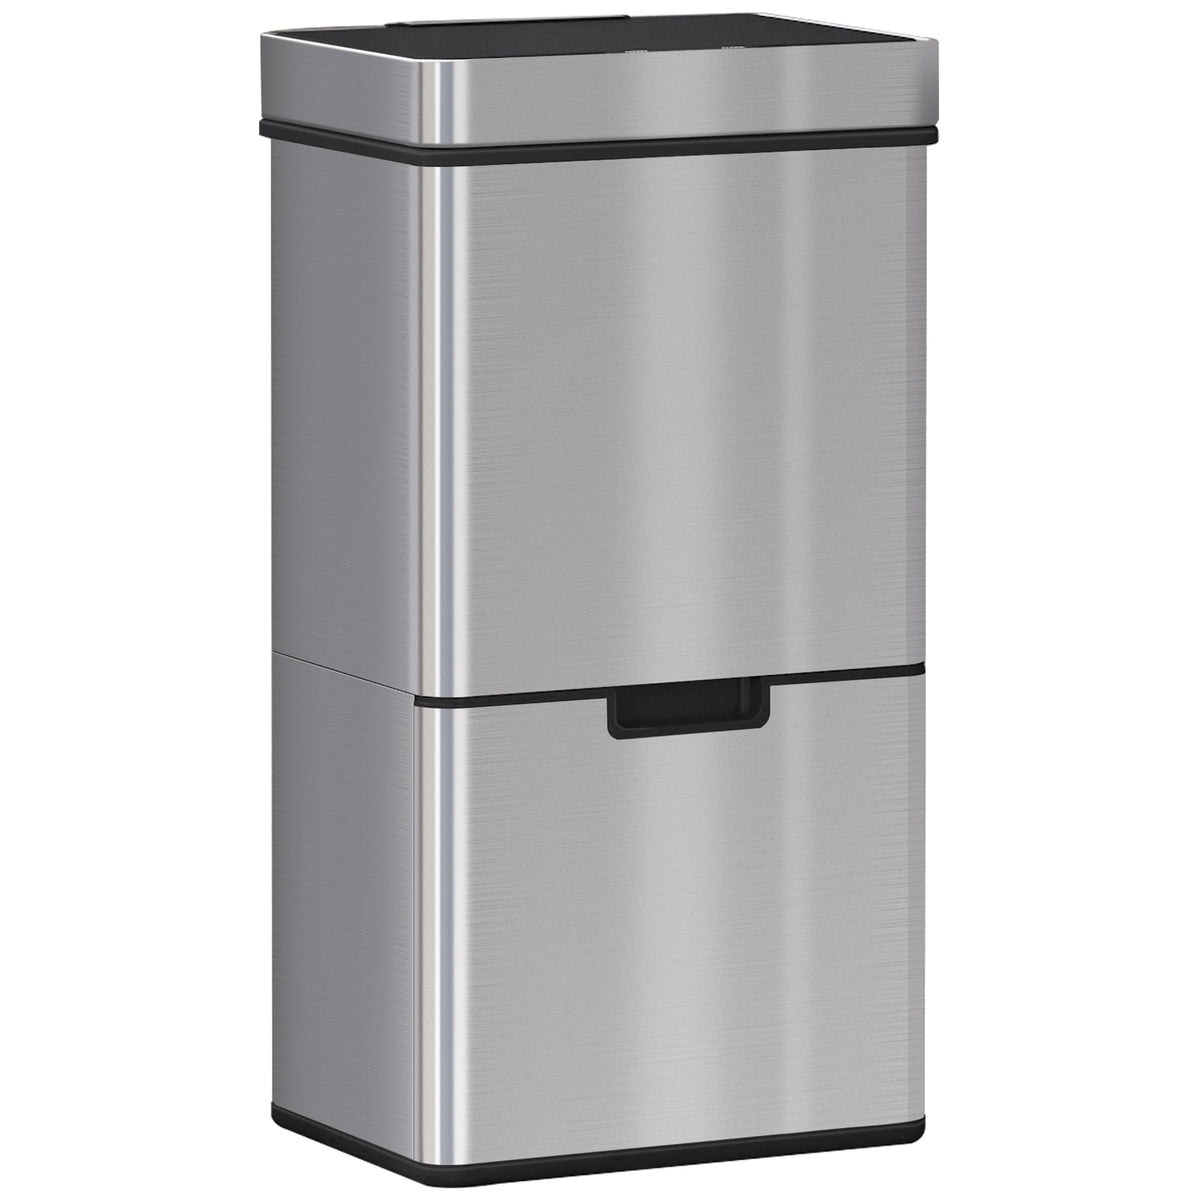 HOMCOM 72L Recycling Sensor Bin, Stainless Steel 3 Compartments for Both Wet or Dry Waste with Removable Lid Kitchen Home - TovaHaus